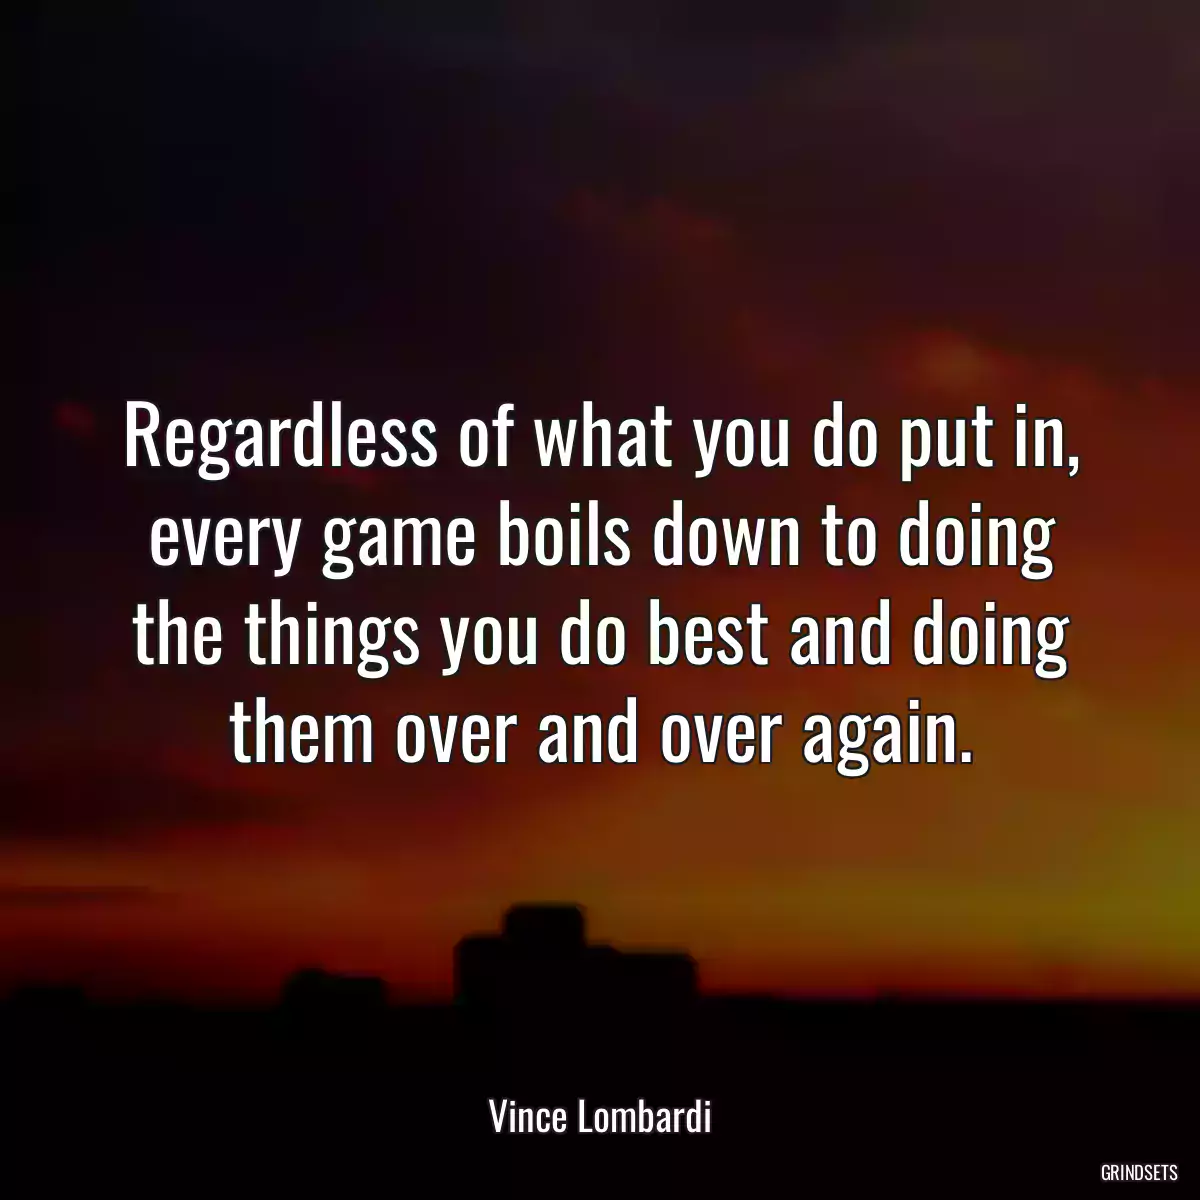 Regardless of what you do put in, every game boils down to doing the things you do best and doing them over and over again.